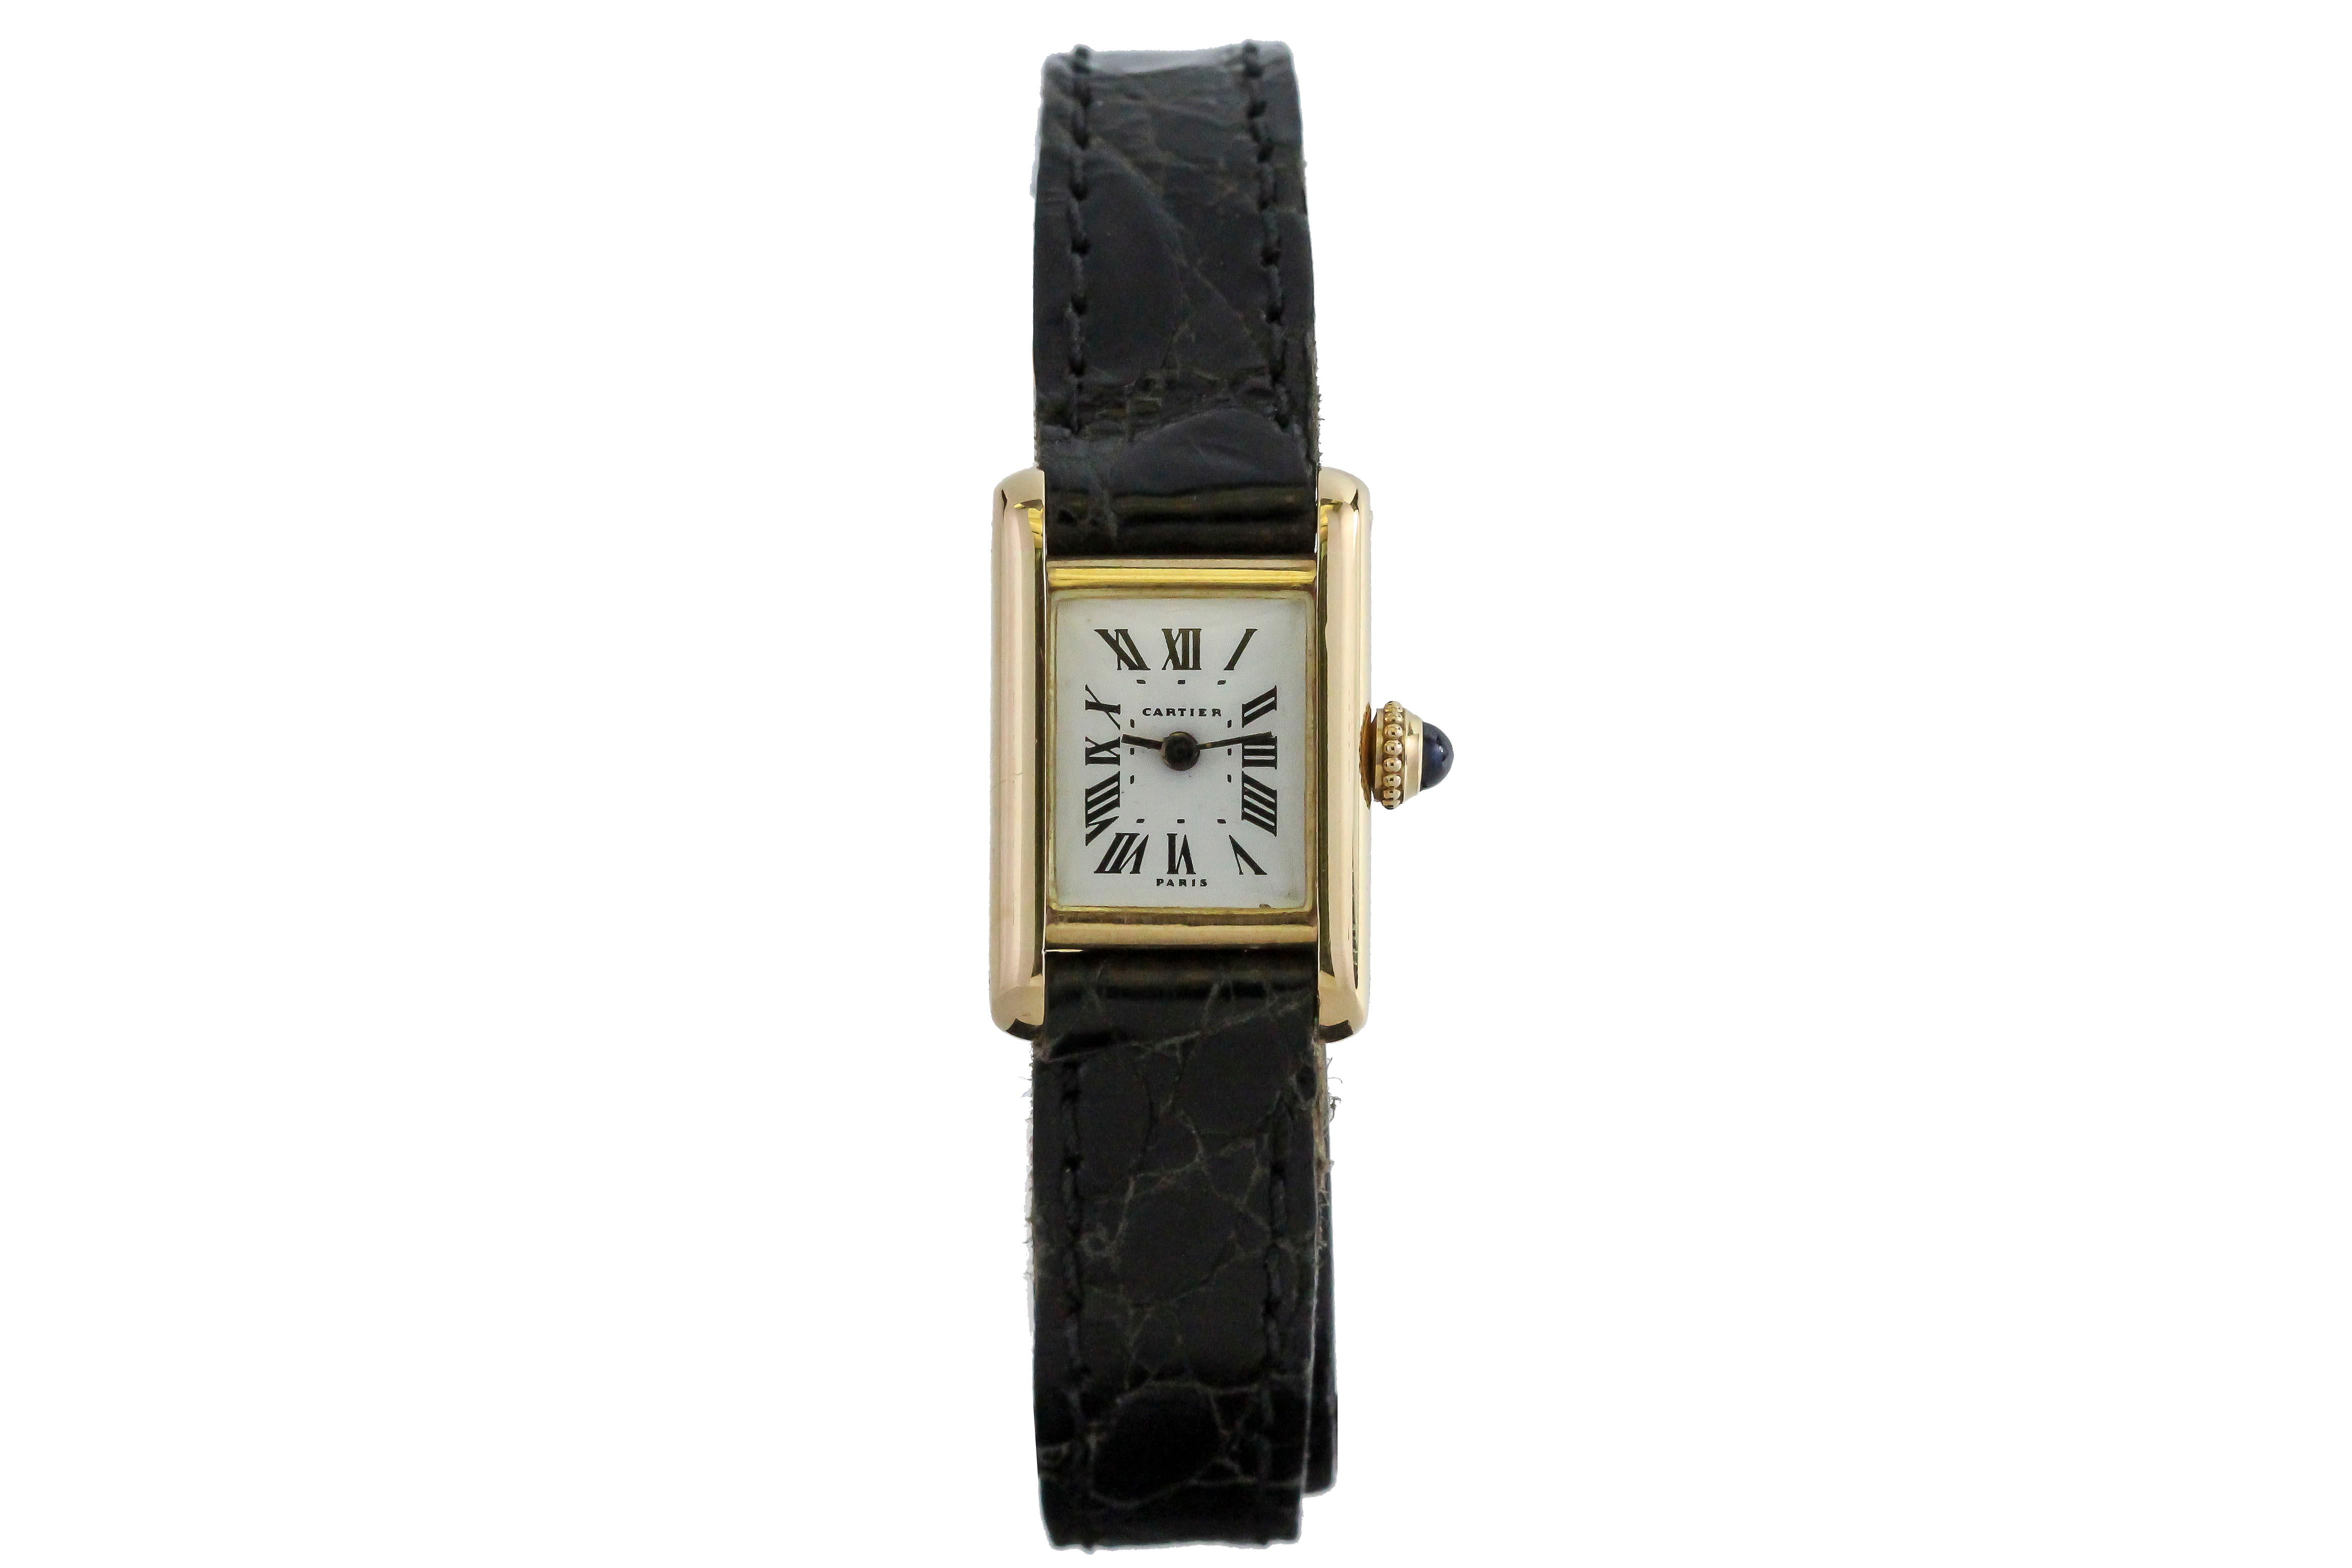 Cartier Paris Mini Tank in 18k yellow gold has a manual wind movement, cream dial with Roman numerals and is on a leather strap with a Cartier deployant clasp.